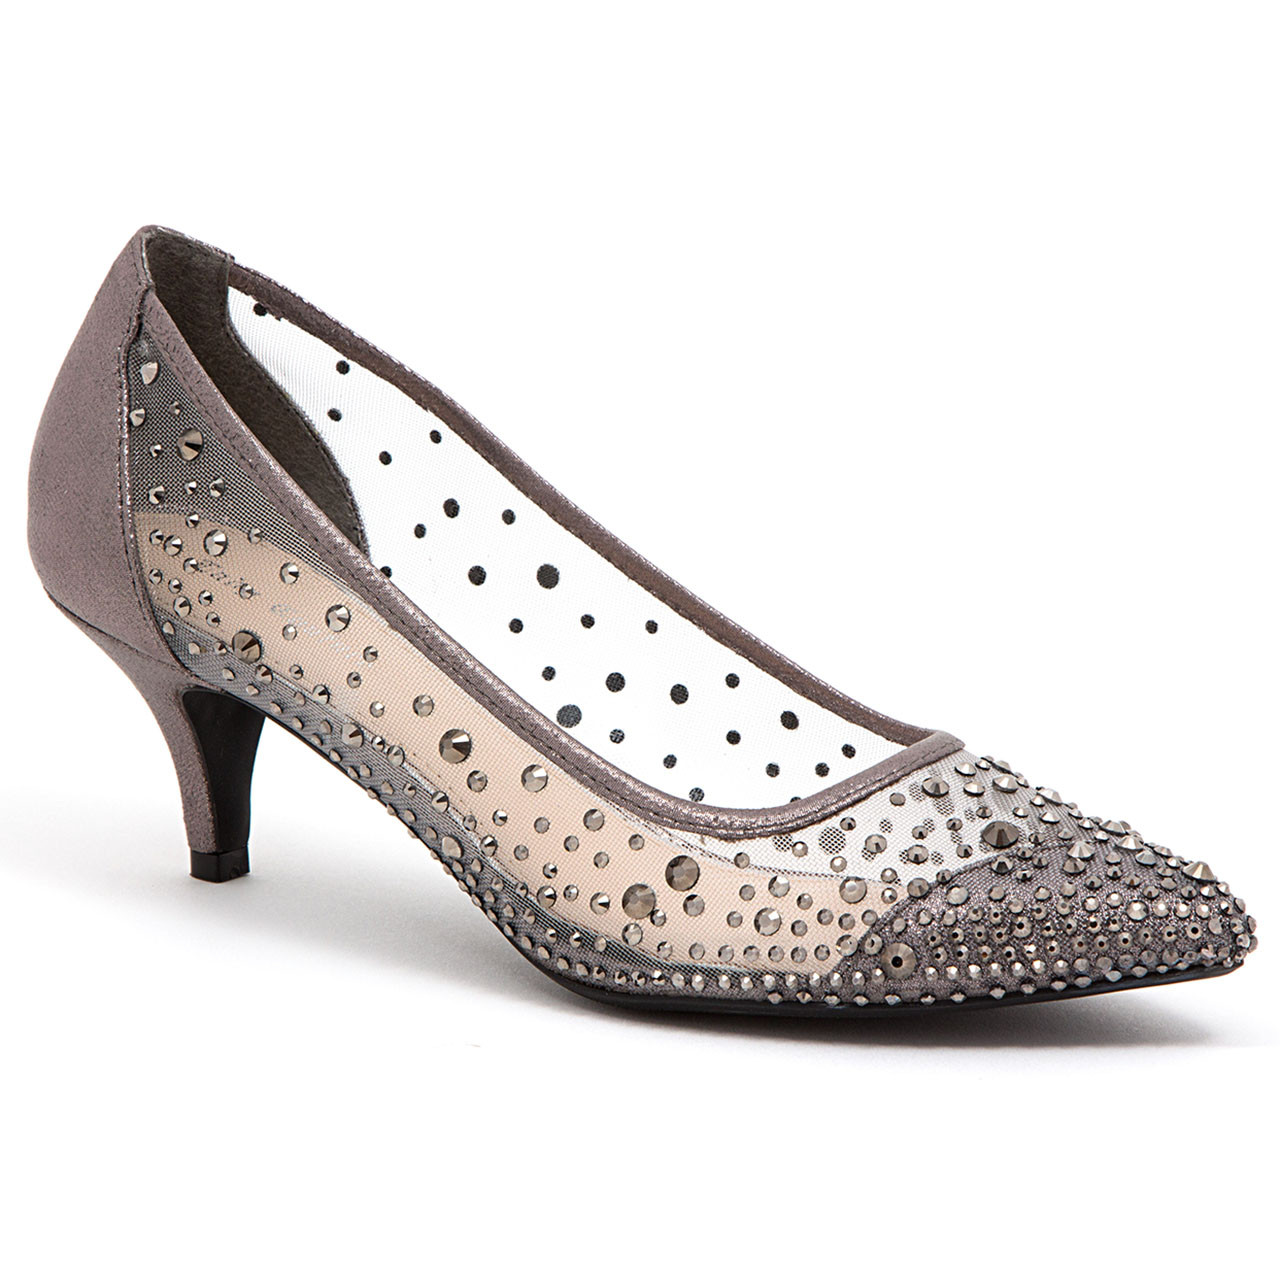 Lady Couture Silk Pewter Embellished Kitten Heels